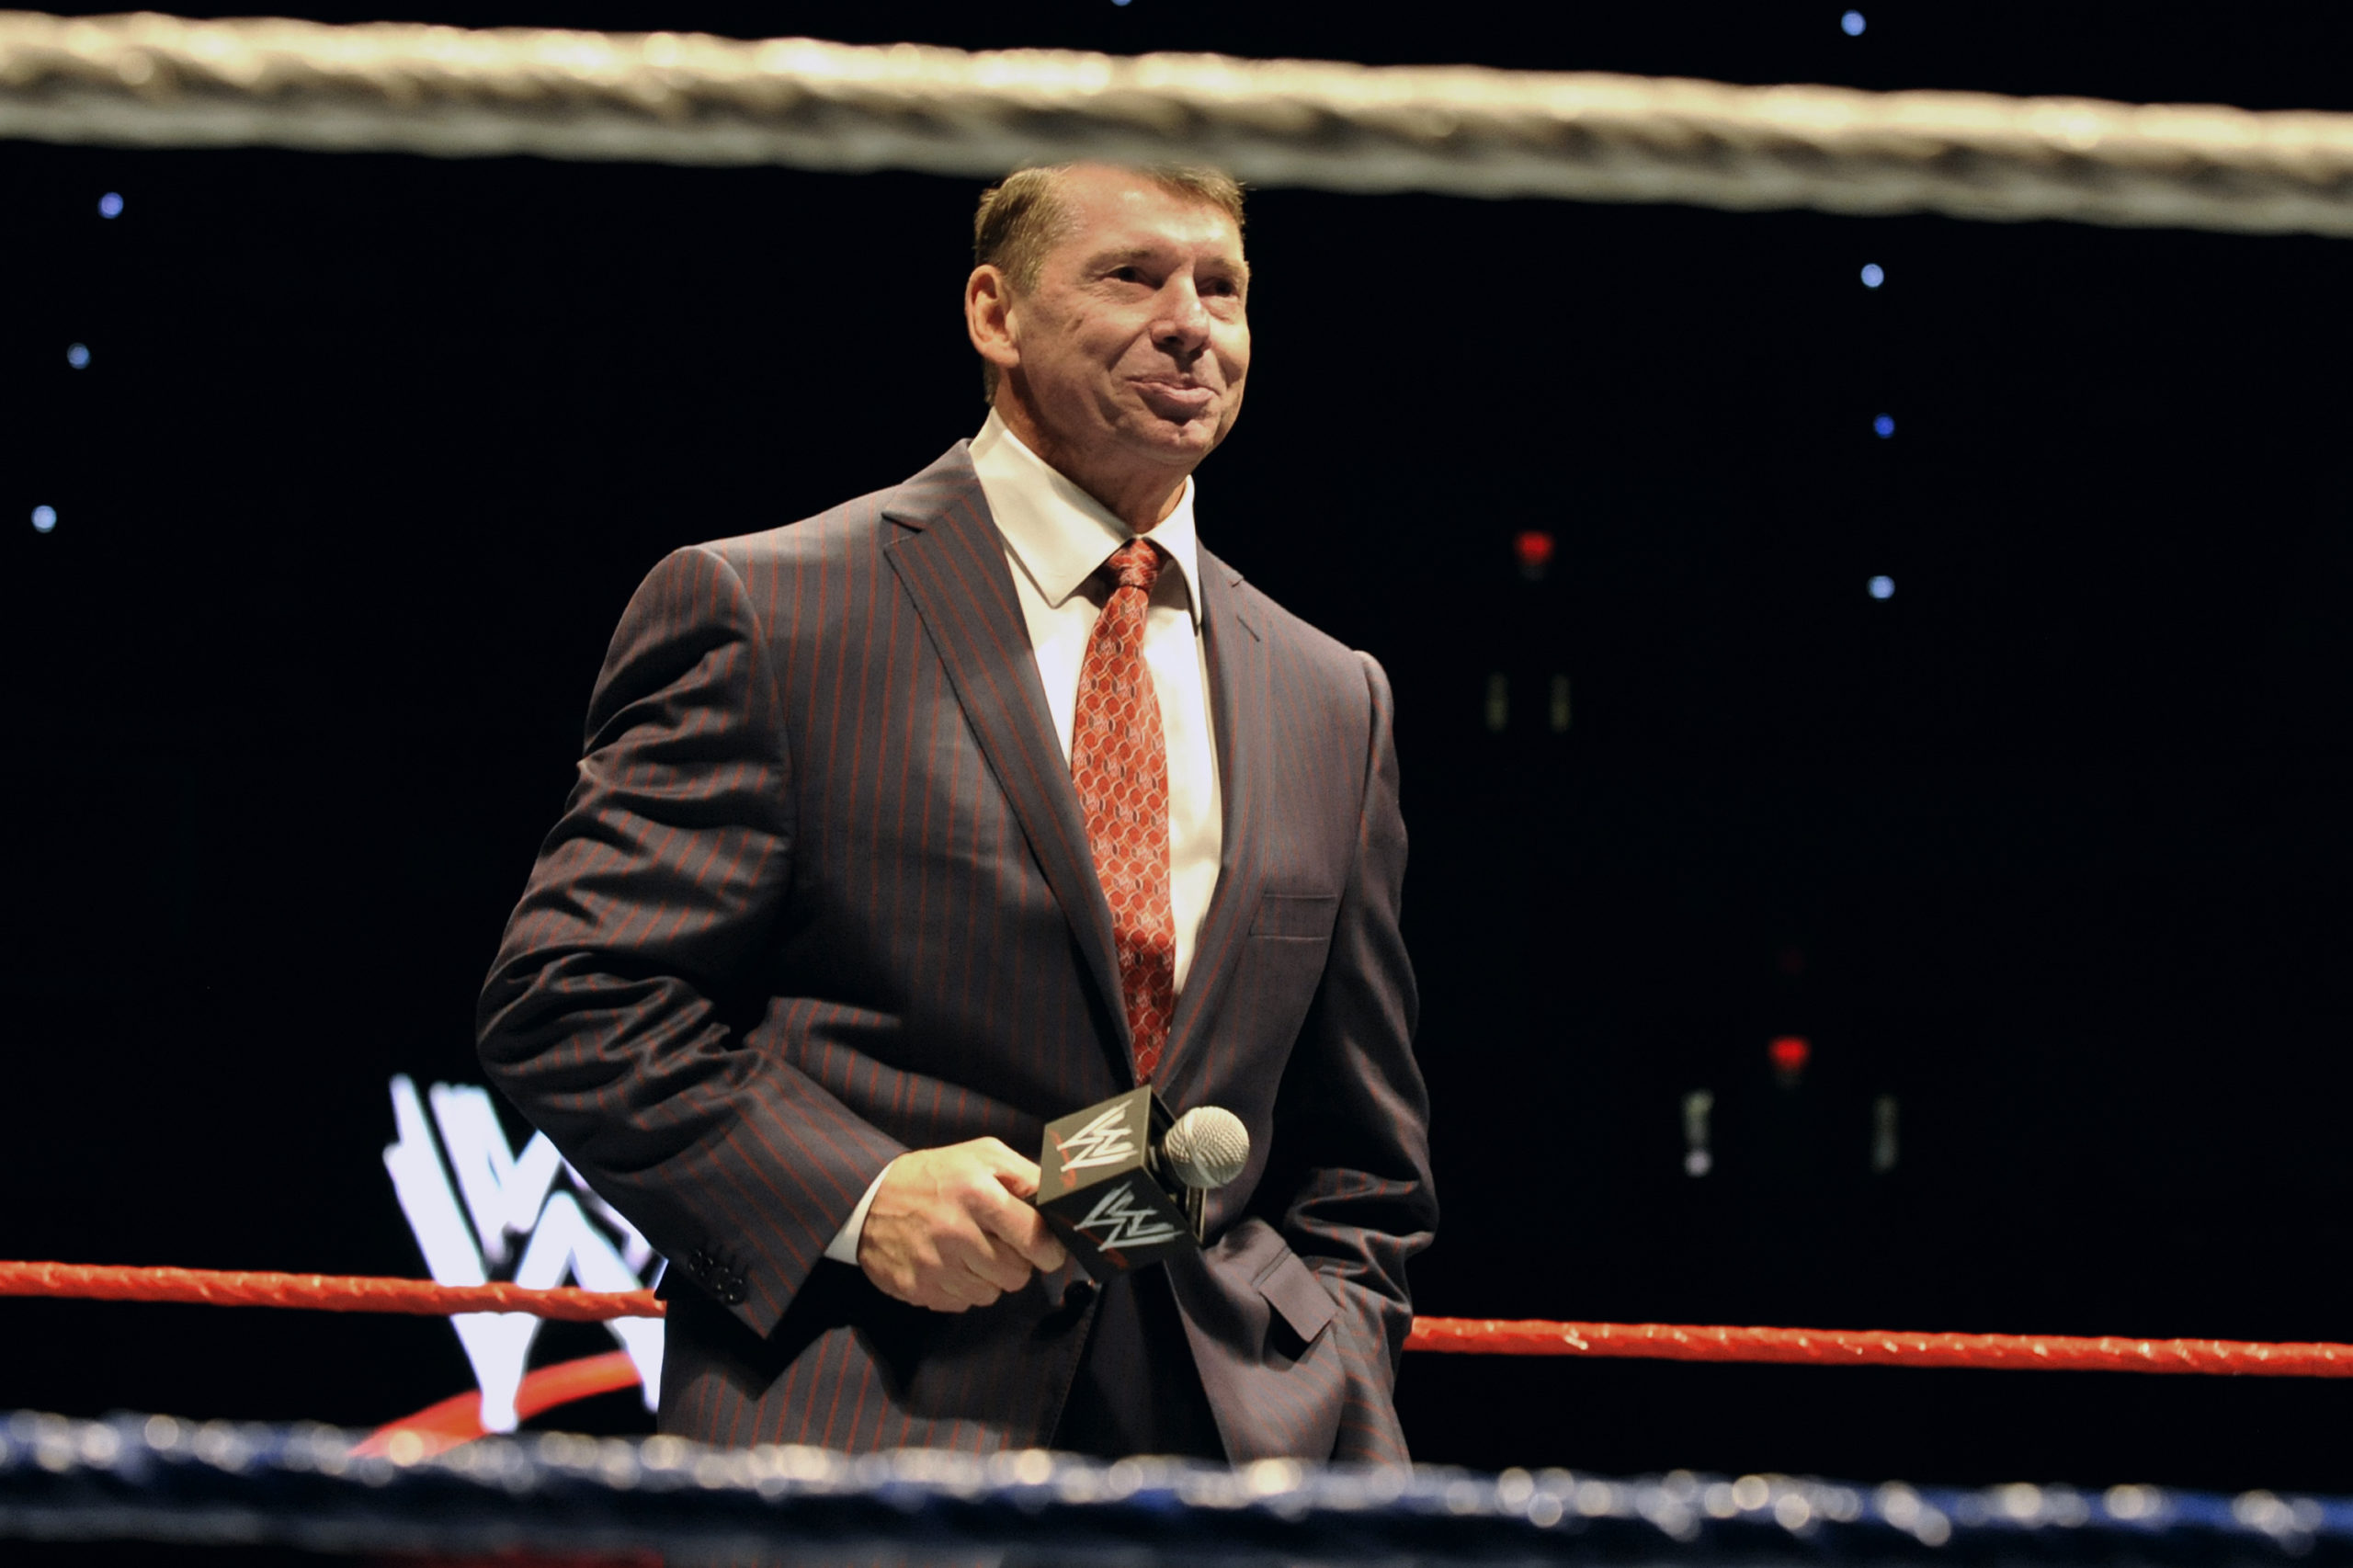 WWE chairman and CEO Vince McMahon, seen in a 2010 photo, resigned Friday, one day after a former WWE employee filed a federal lawsuit accusing McMahon and another former executive of serious sexual misconduct.